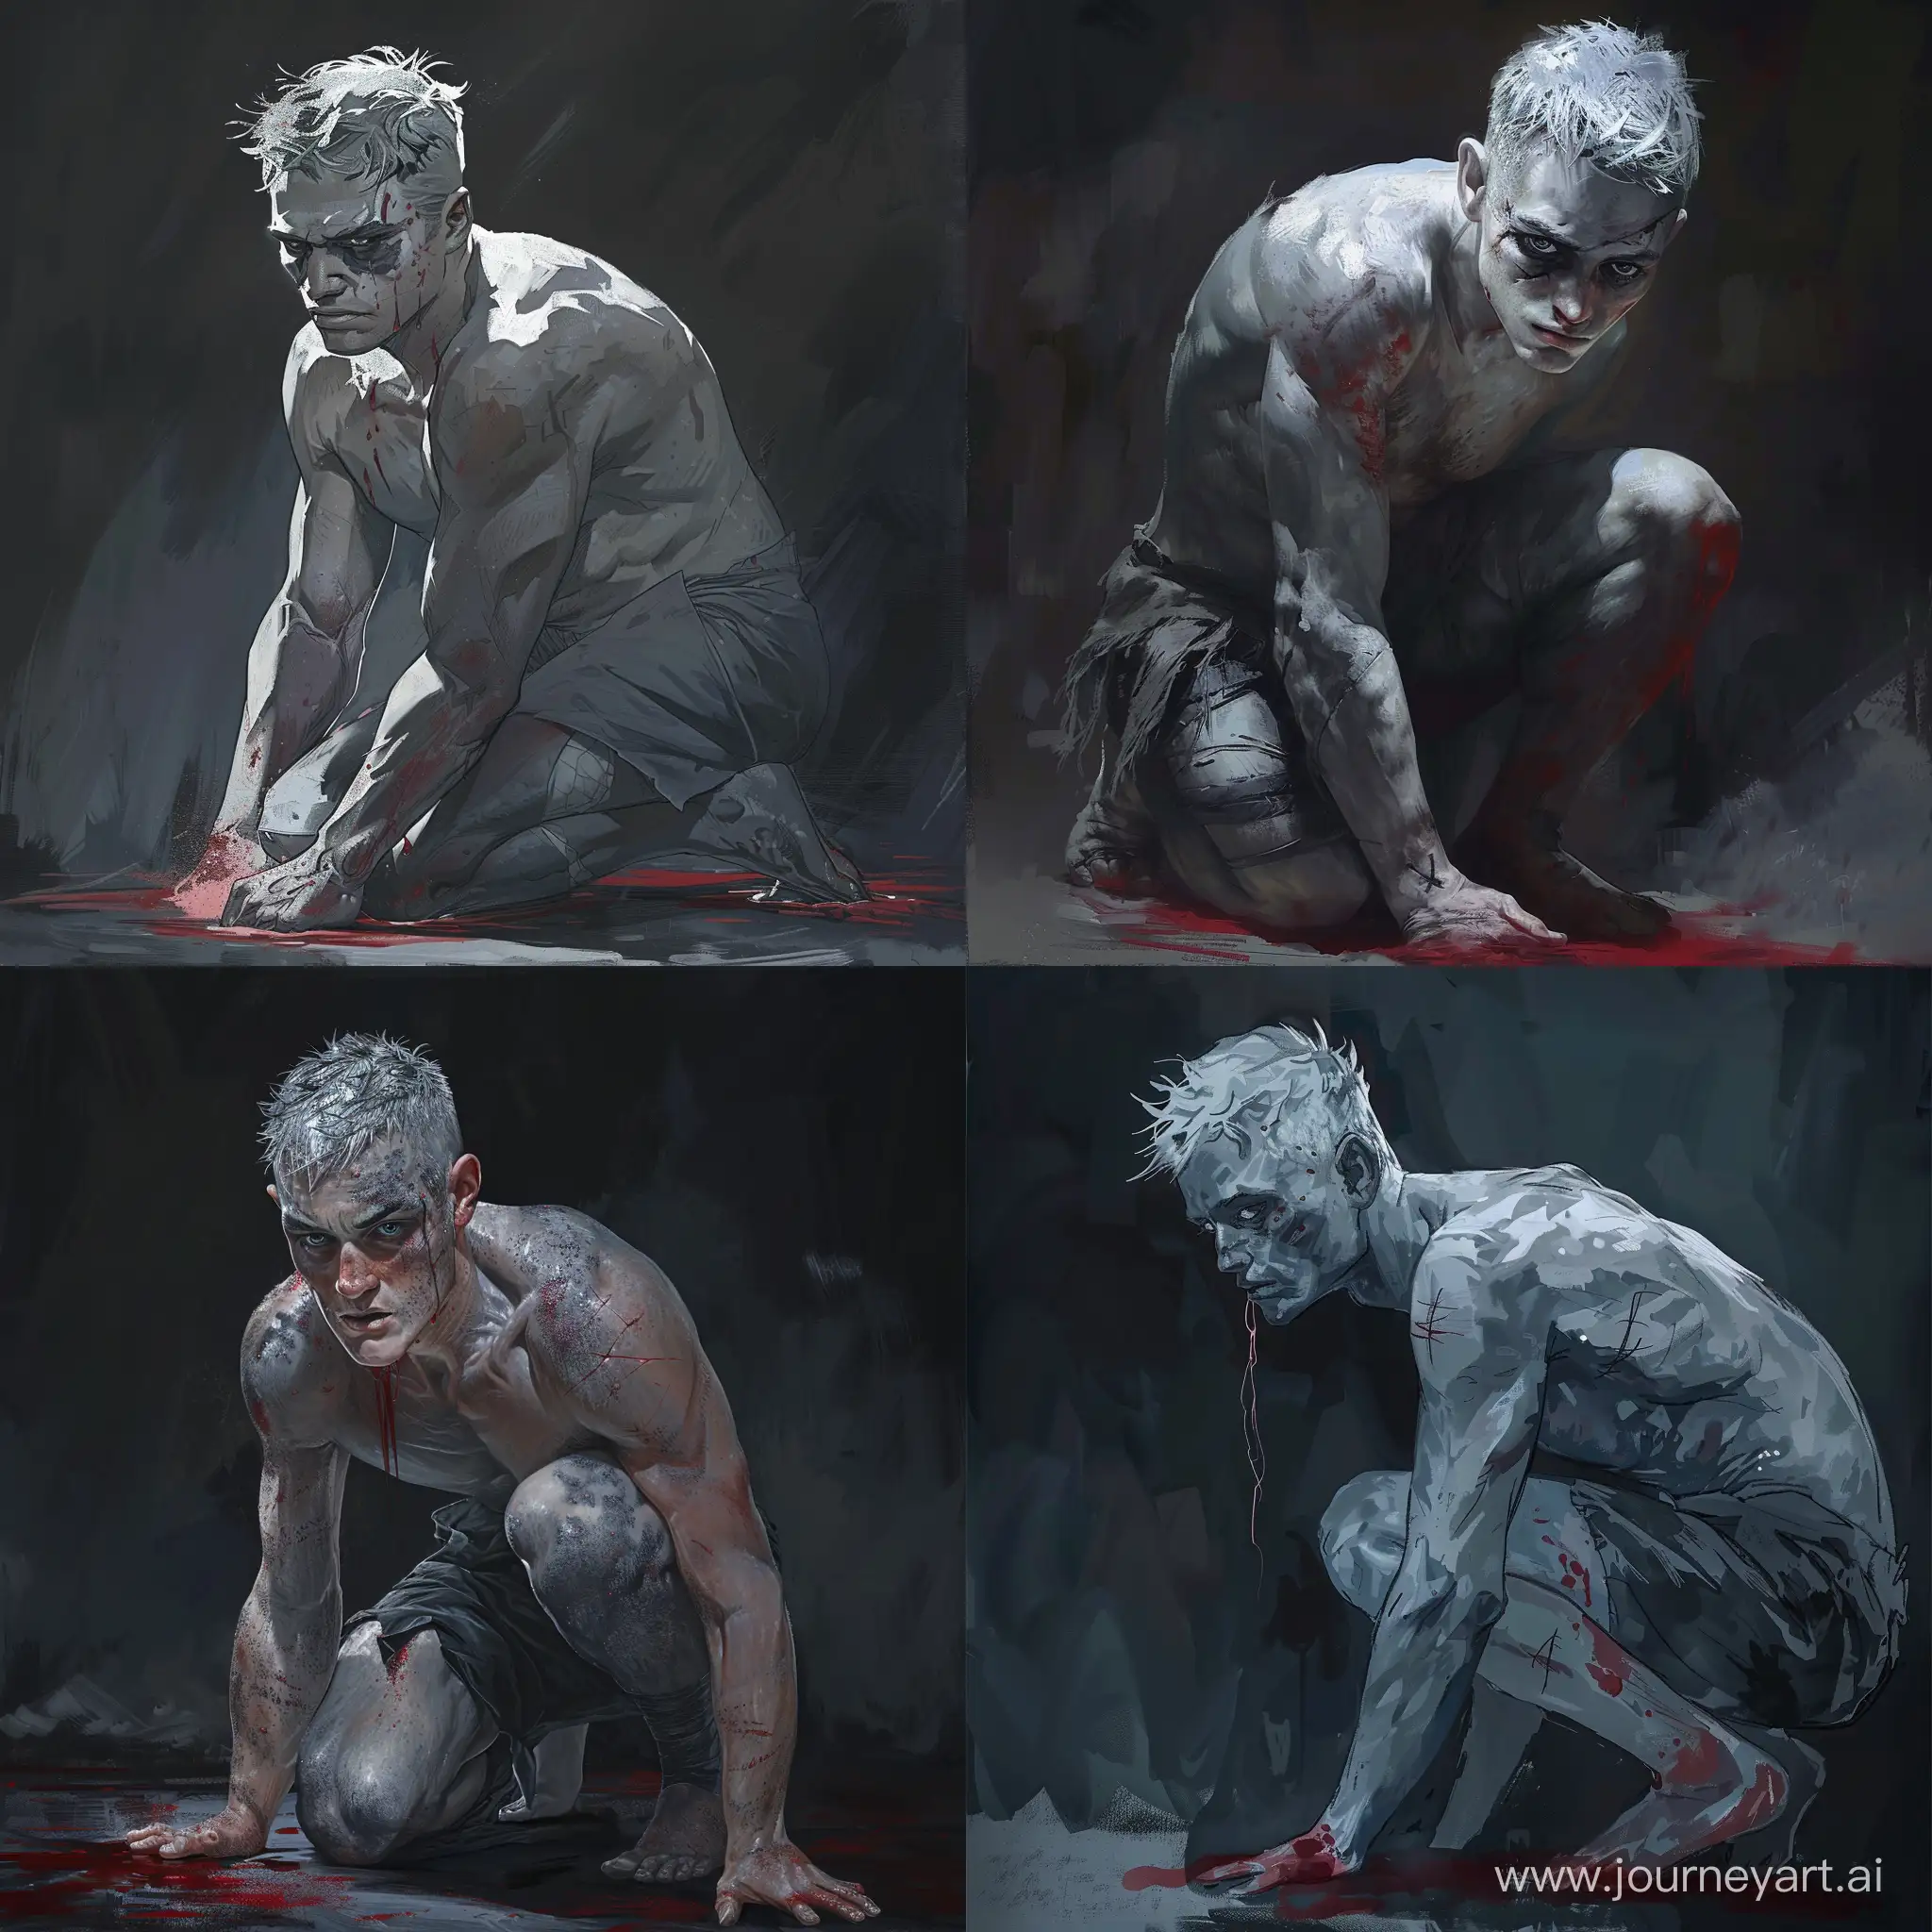 An athletic gray-skinned man is kneeling, he has short blond hair with strands hanging down in front, gray eyes, looks from under his brows, scars on his face. The man is covered in red liquid. Darkness in the background